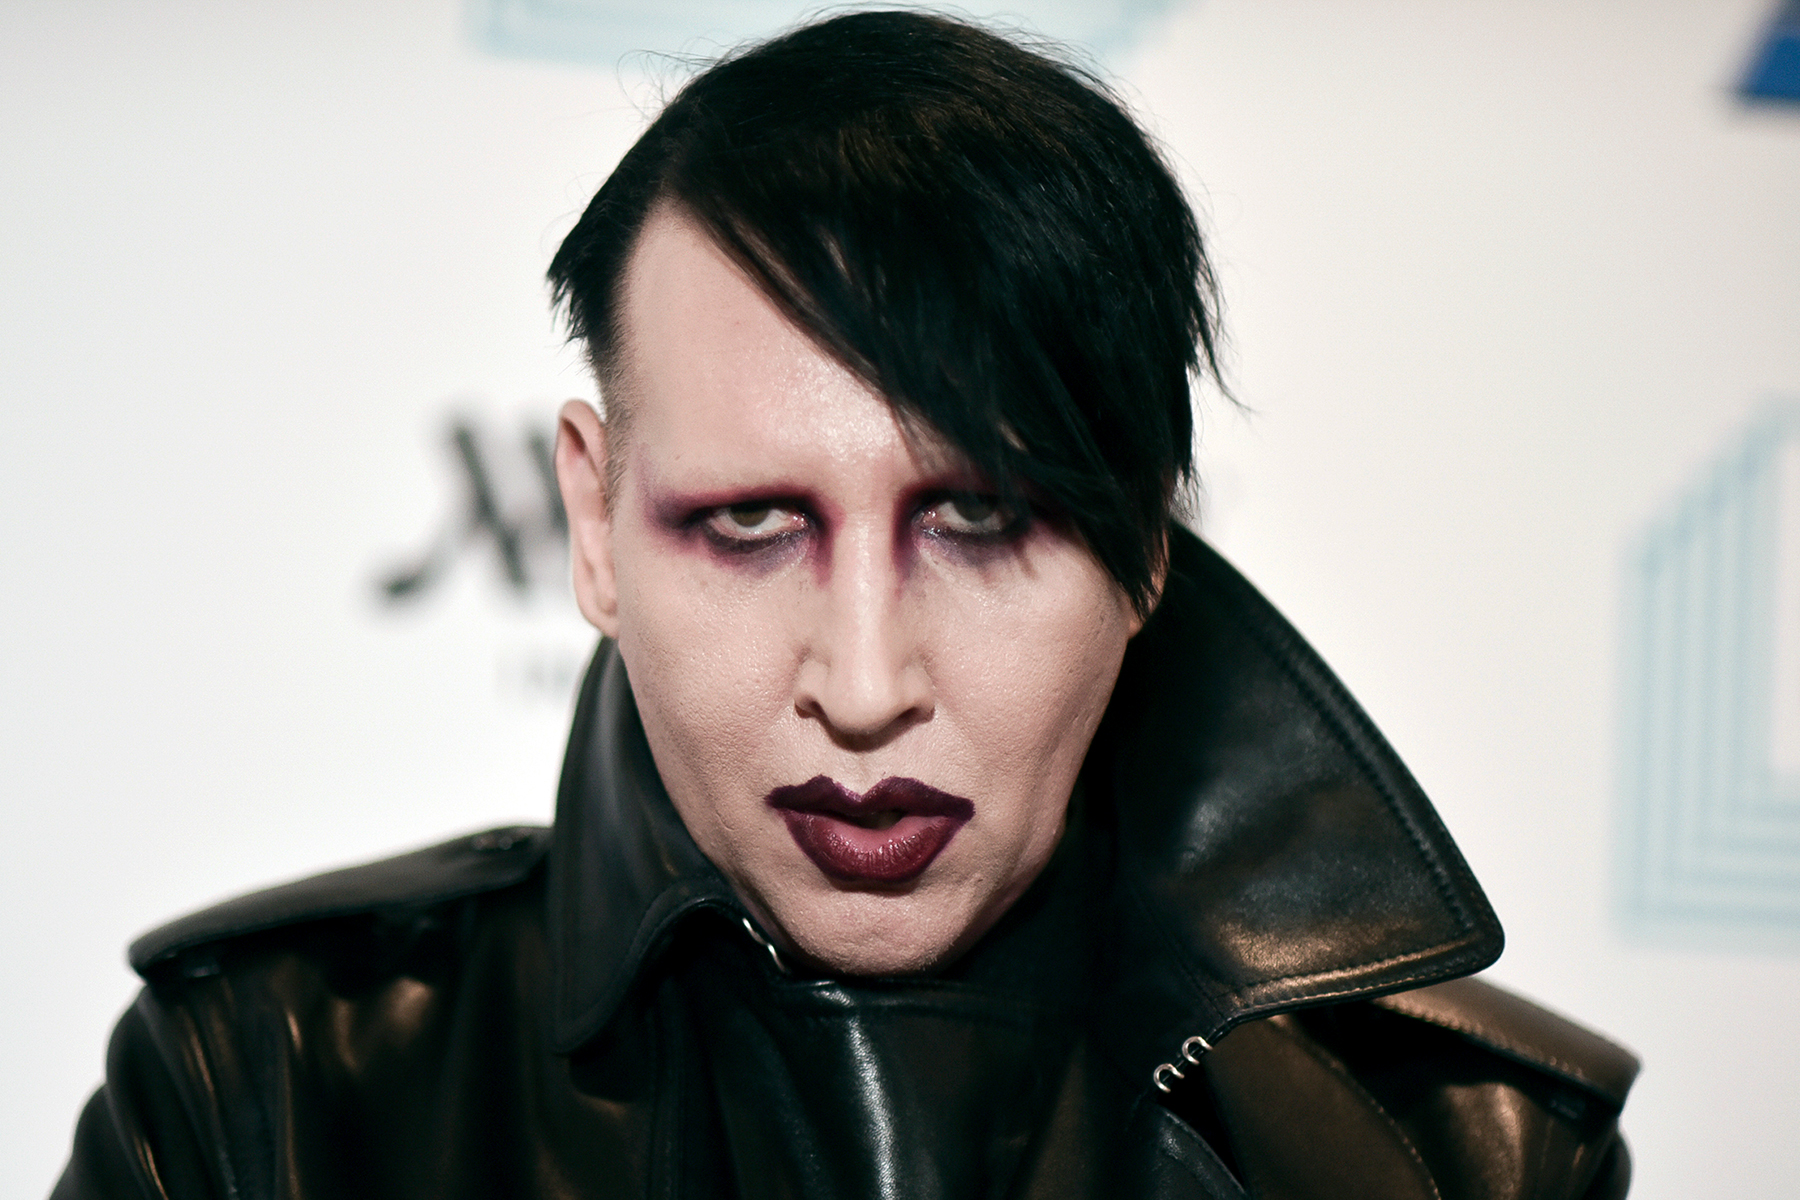 Marilyn Manson Lawyer: ‘Global Mediation’ of Rape Claims is Possible